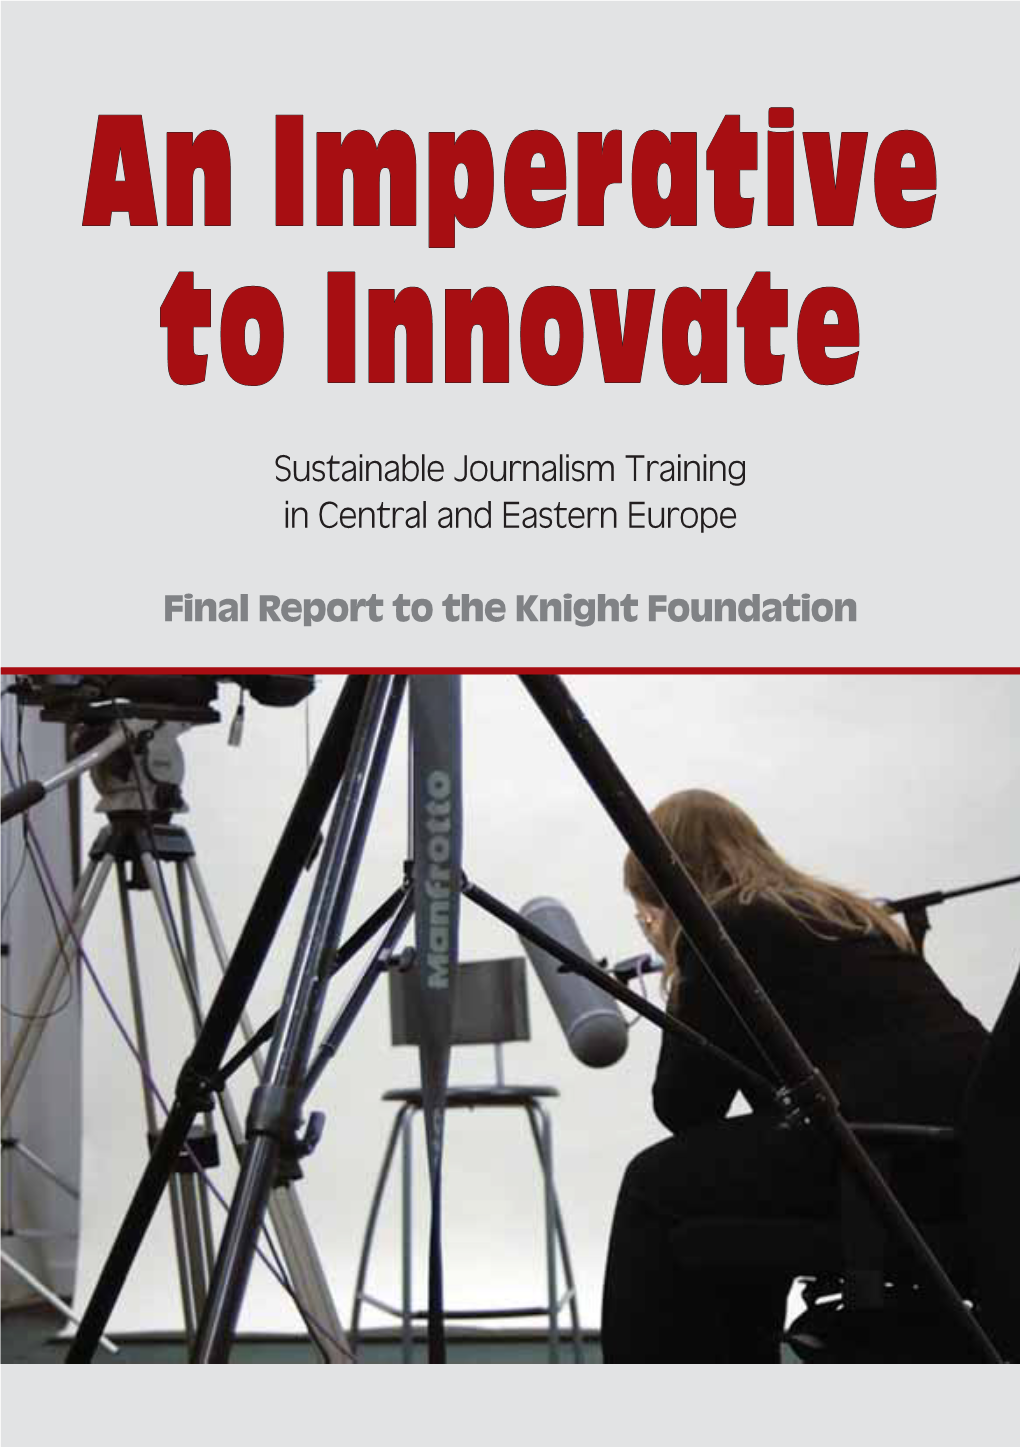 Sustainable Journalism Training in Central and Eastern Europe Final